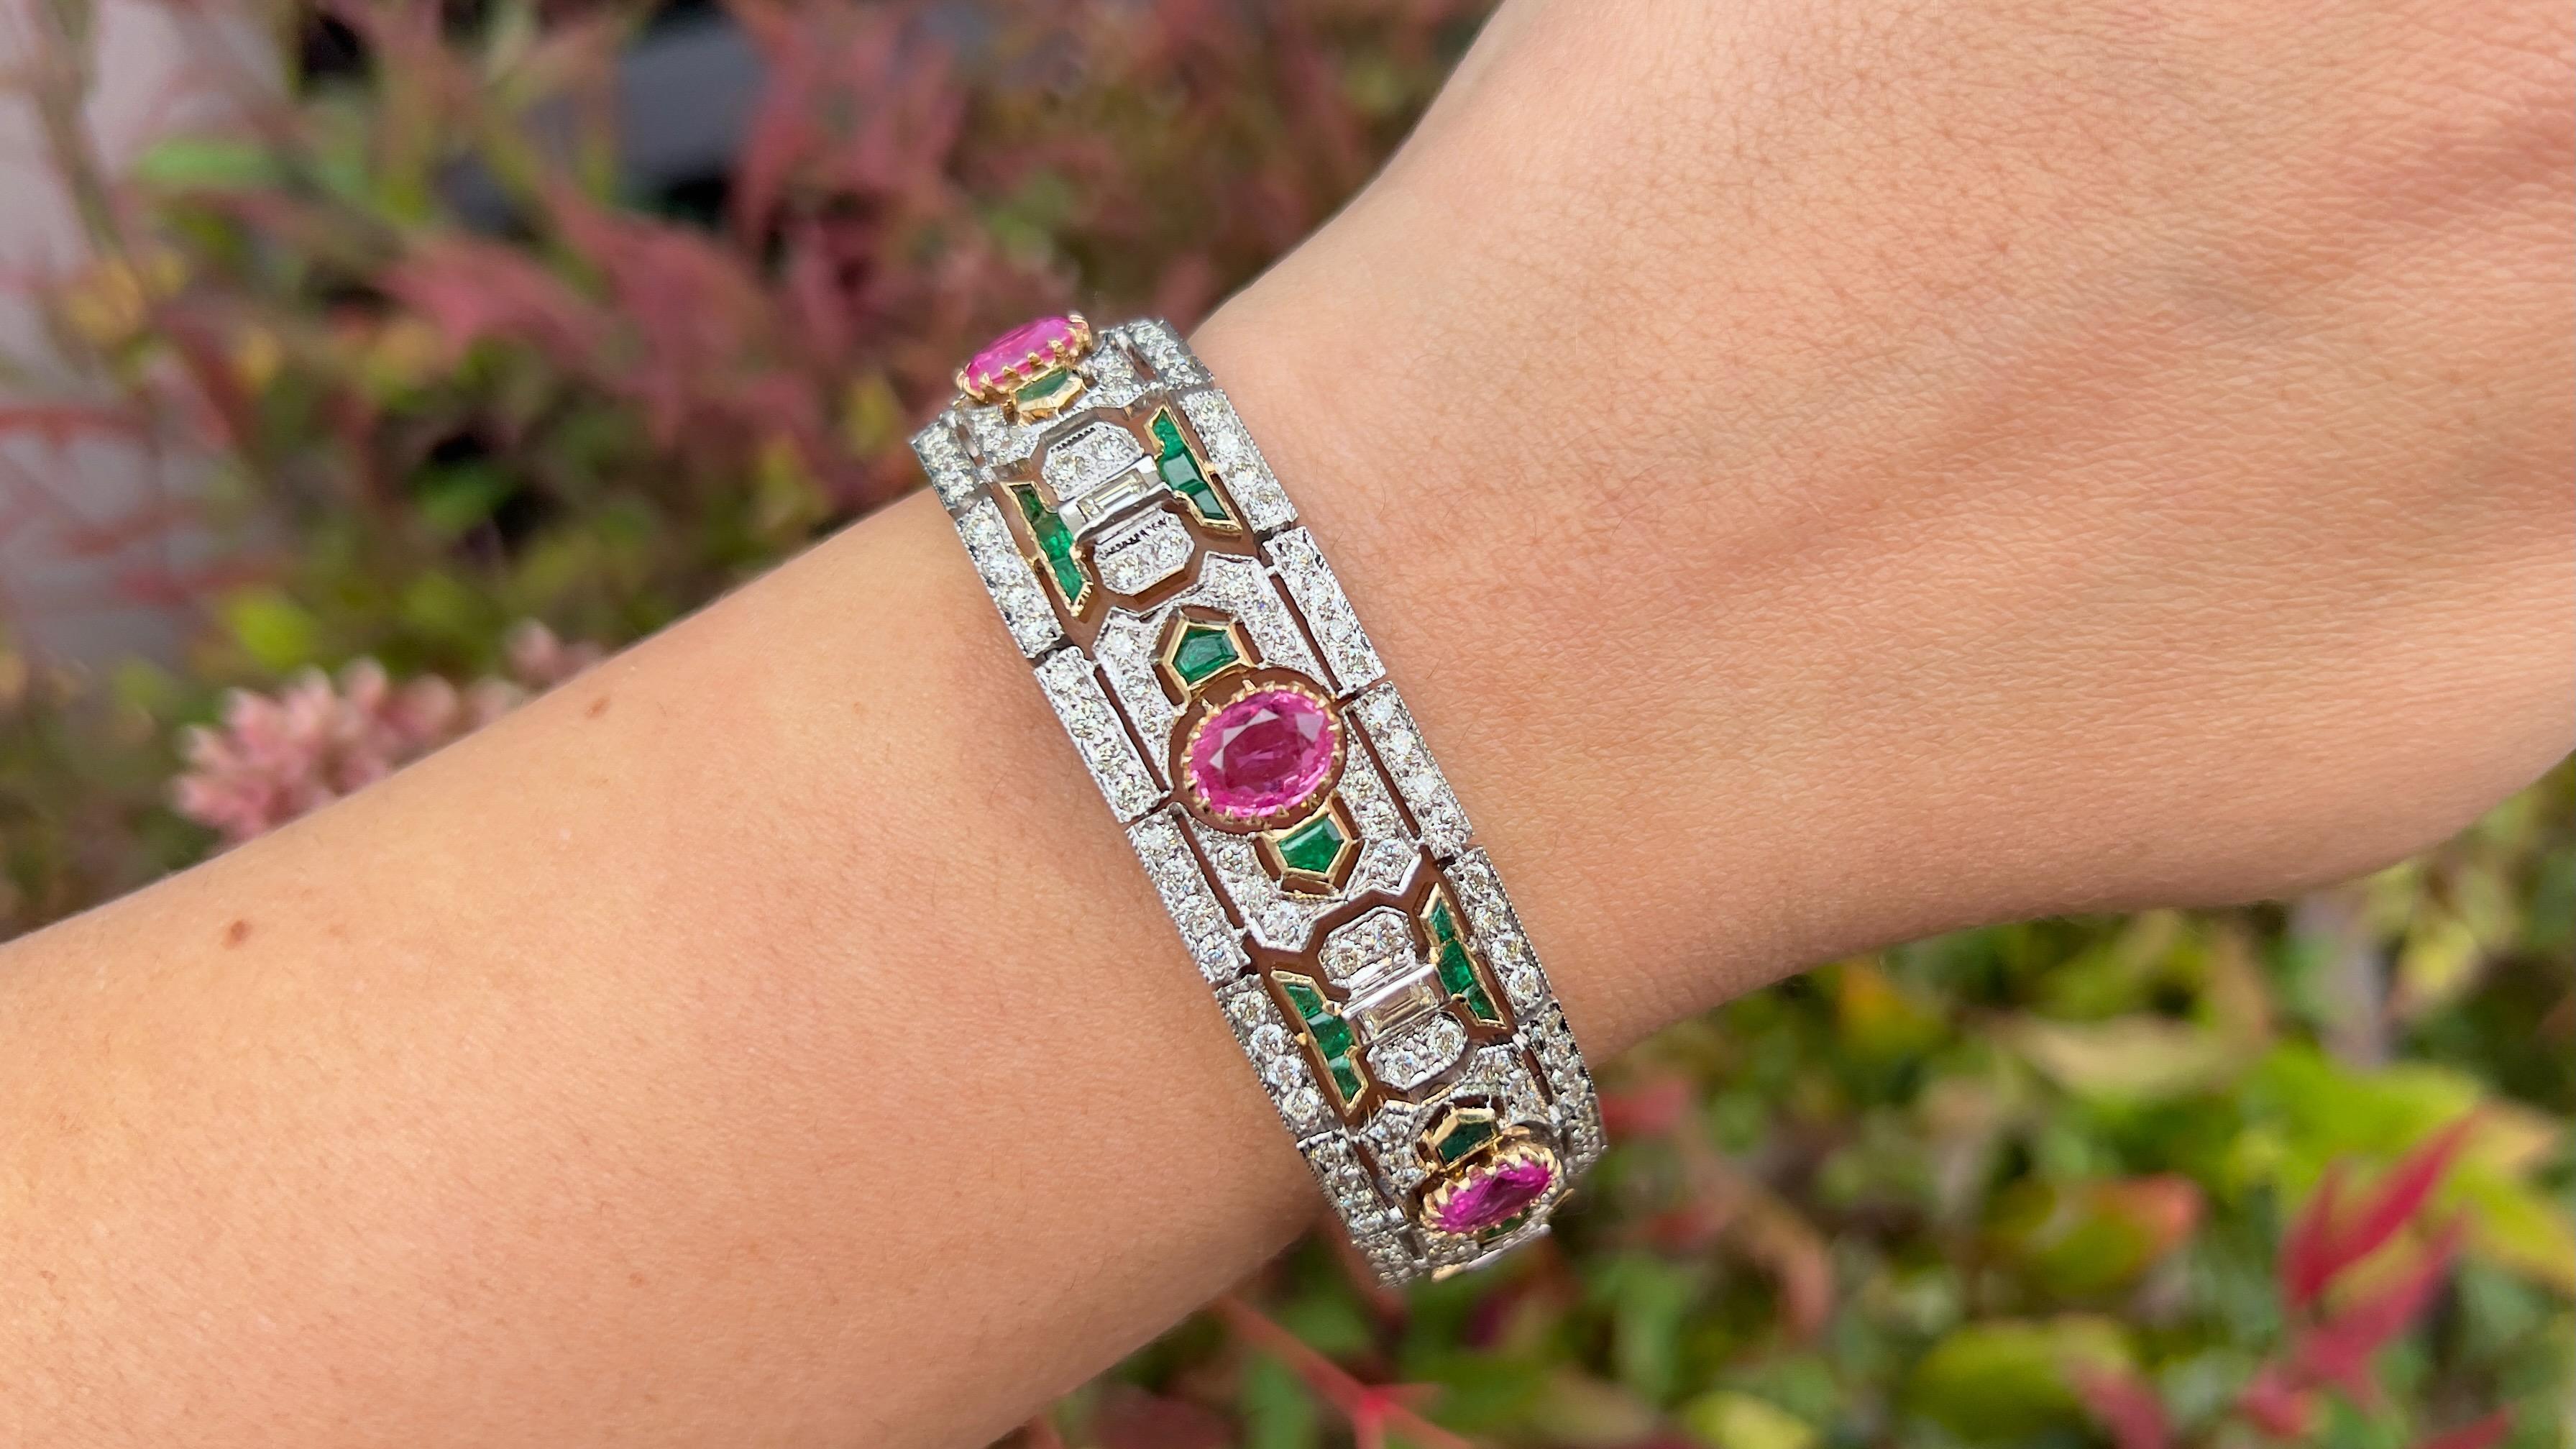 Pink Sapphires = 8.56 Carats
Emeralds = 3 Carats
Diamonds = 8.50 Carats
(Color: F, Clarity: VS)
Metal: 14K Gold
Style: Art Deco
Length: 7 Inches
Jewelry Gift Box Included